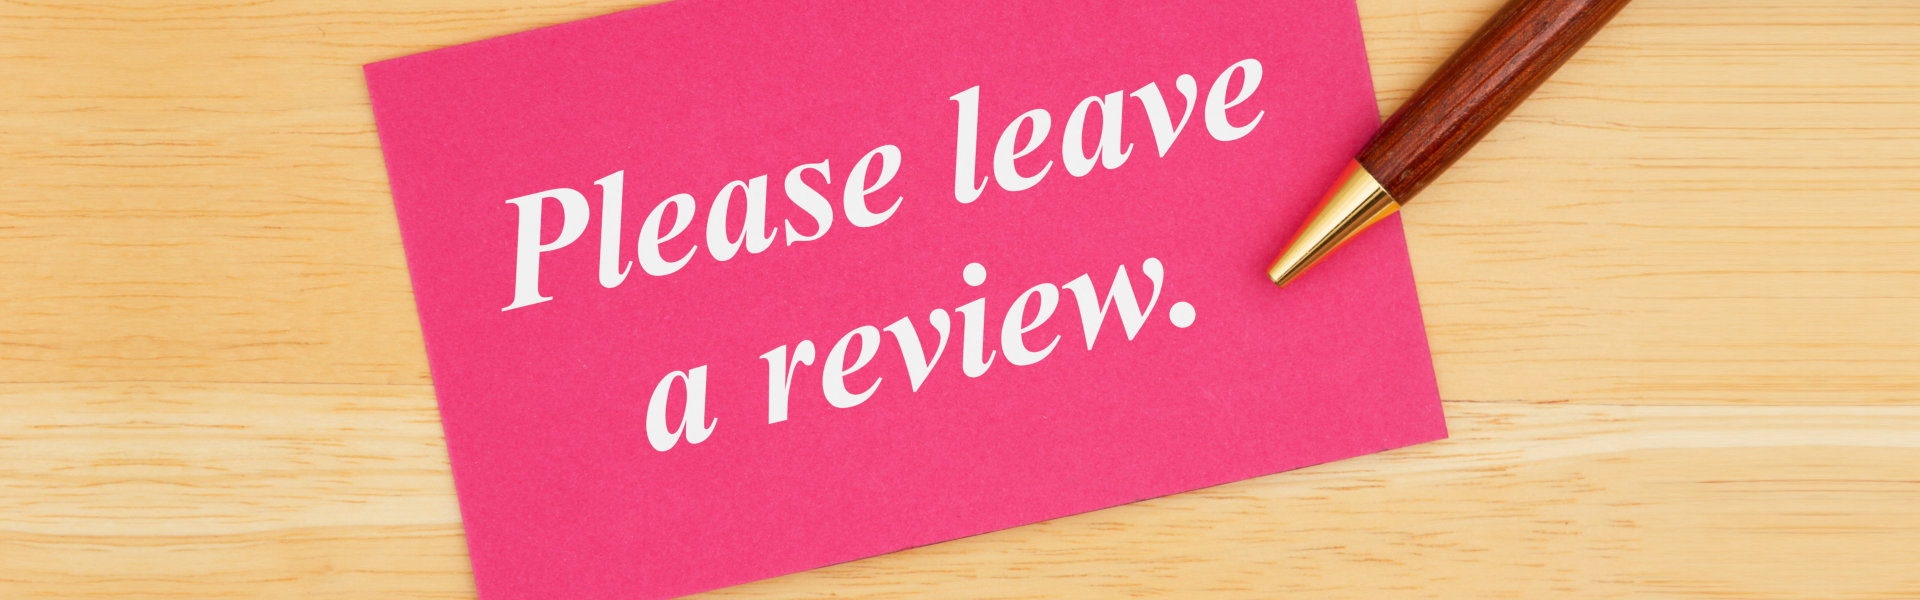 Please leave a review printed on a pink paper